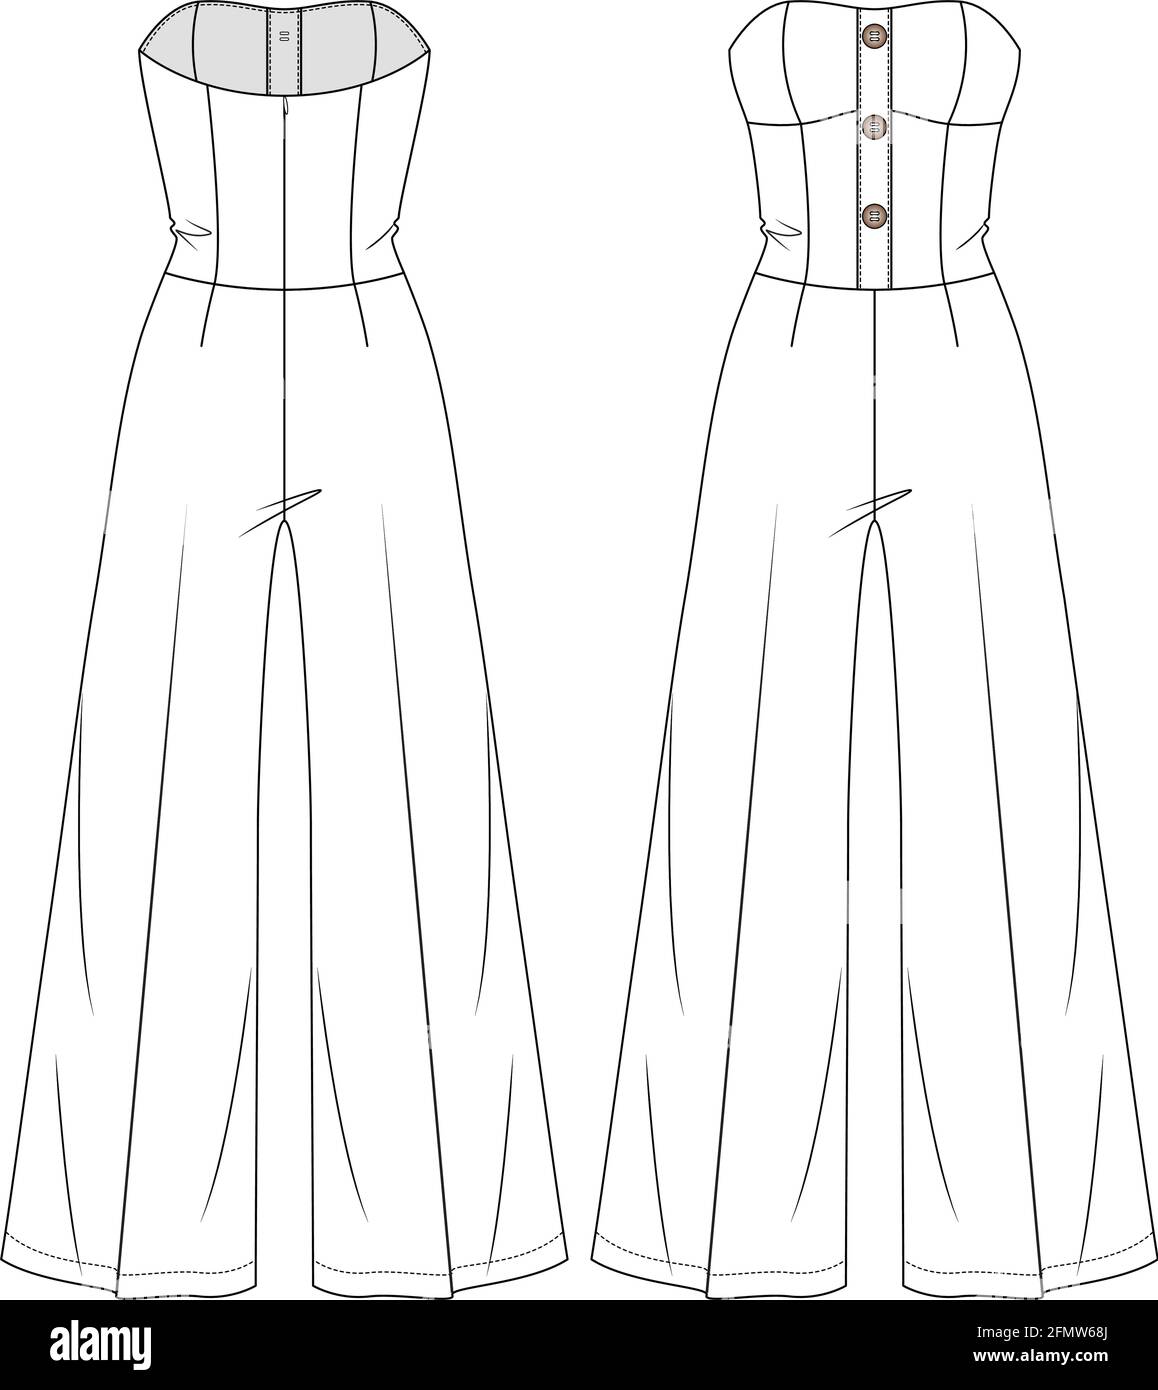 Jumpsuit Fashion Vector Illustration Flat Sketches Stock Vector Royalty  Free 1464232994  Shutterstock